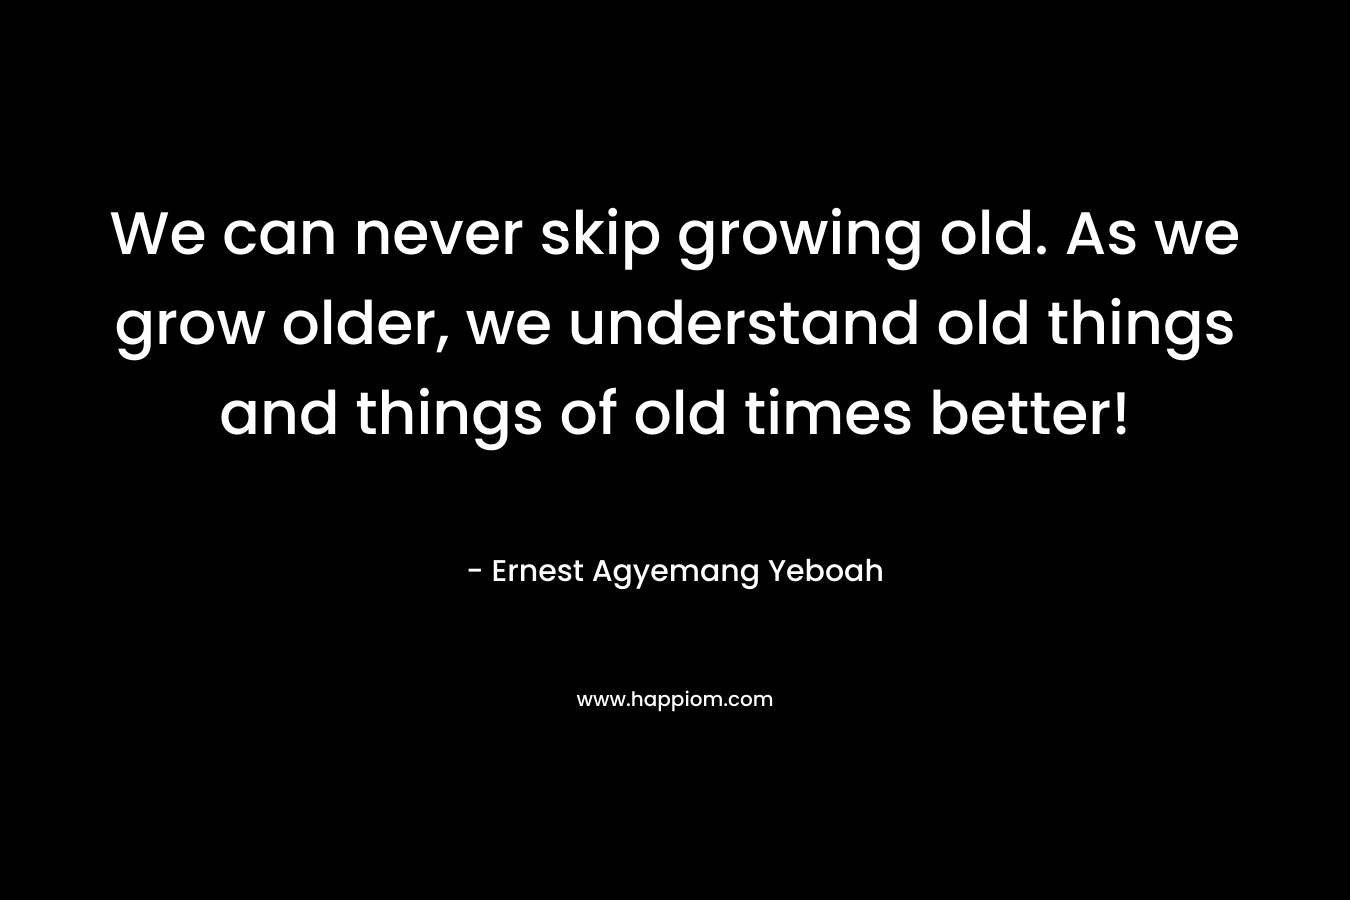 We can never skip growing old. As we grow older, we understand old things and things of old times better!